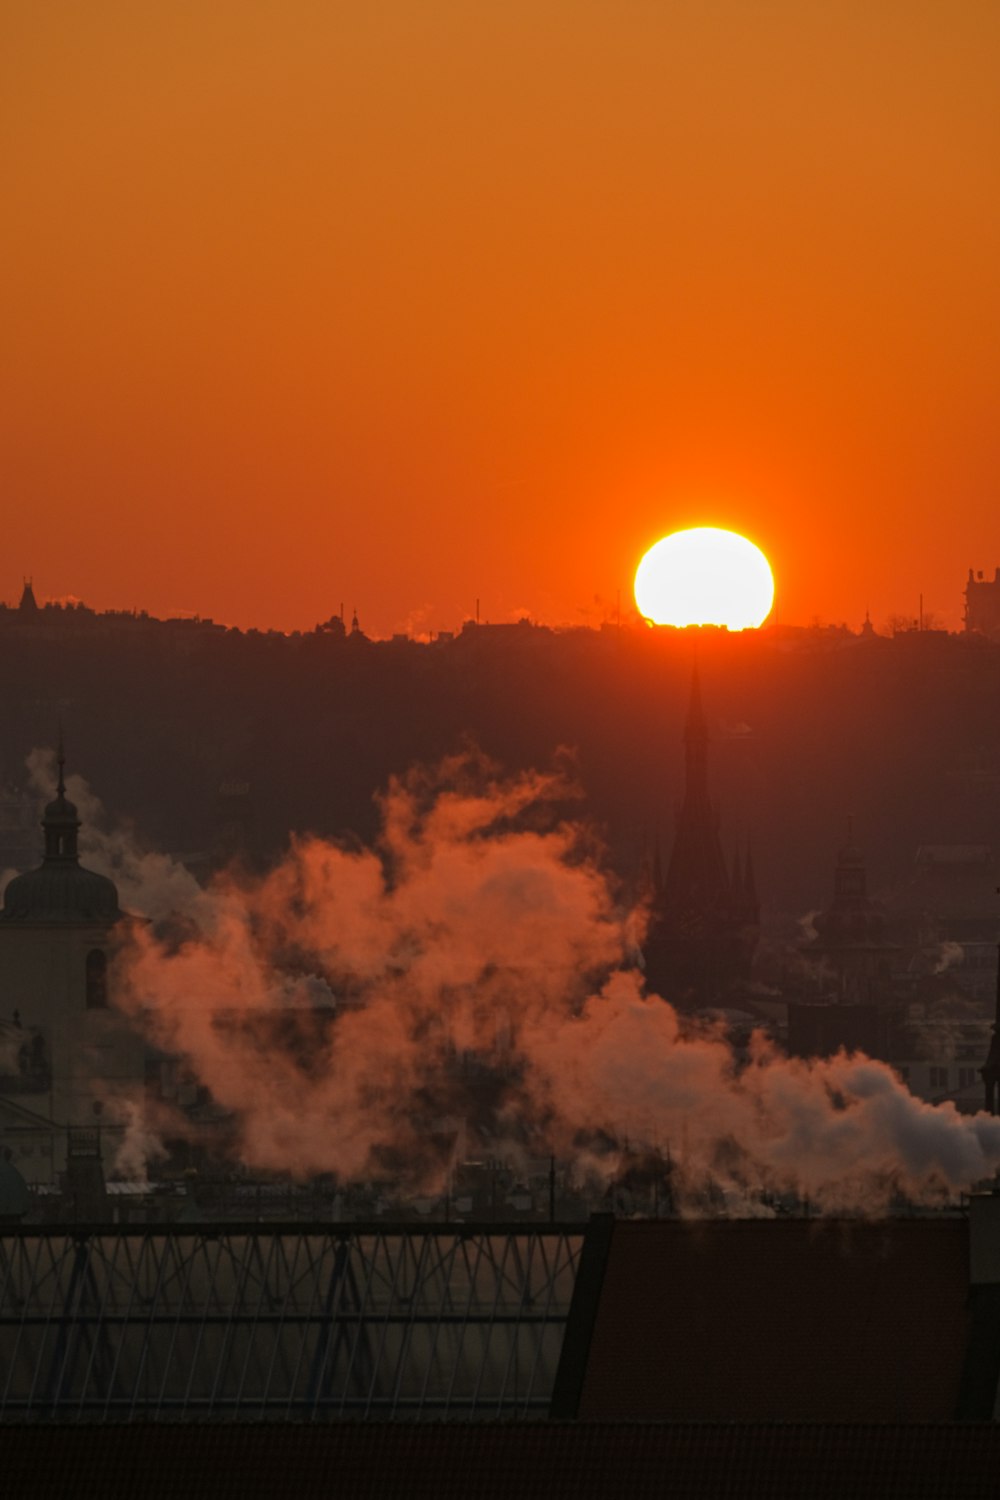 the sun is setting over a city with steam coming out of it